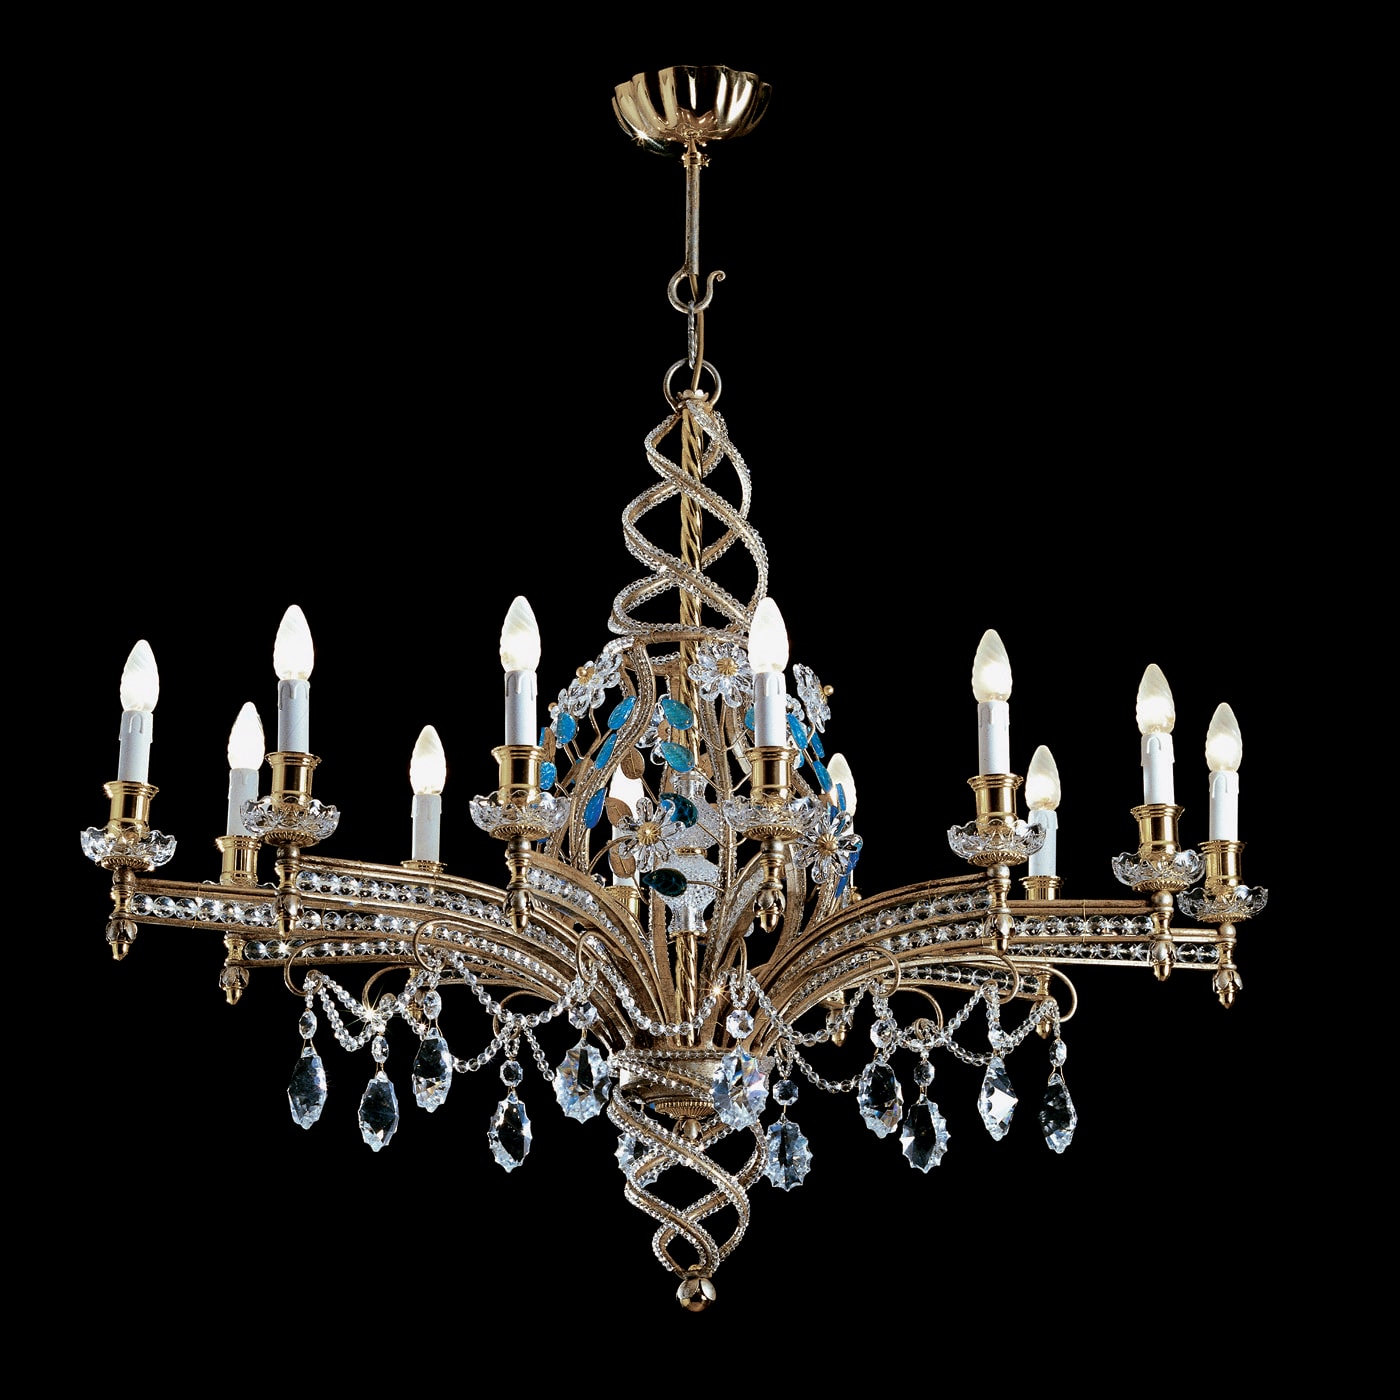 12-Light Iron Chandelier with Straight Arms - Banci